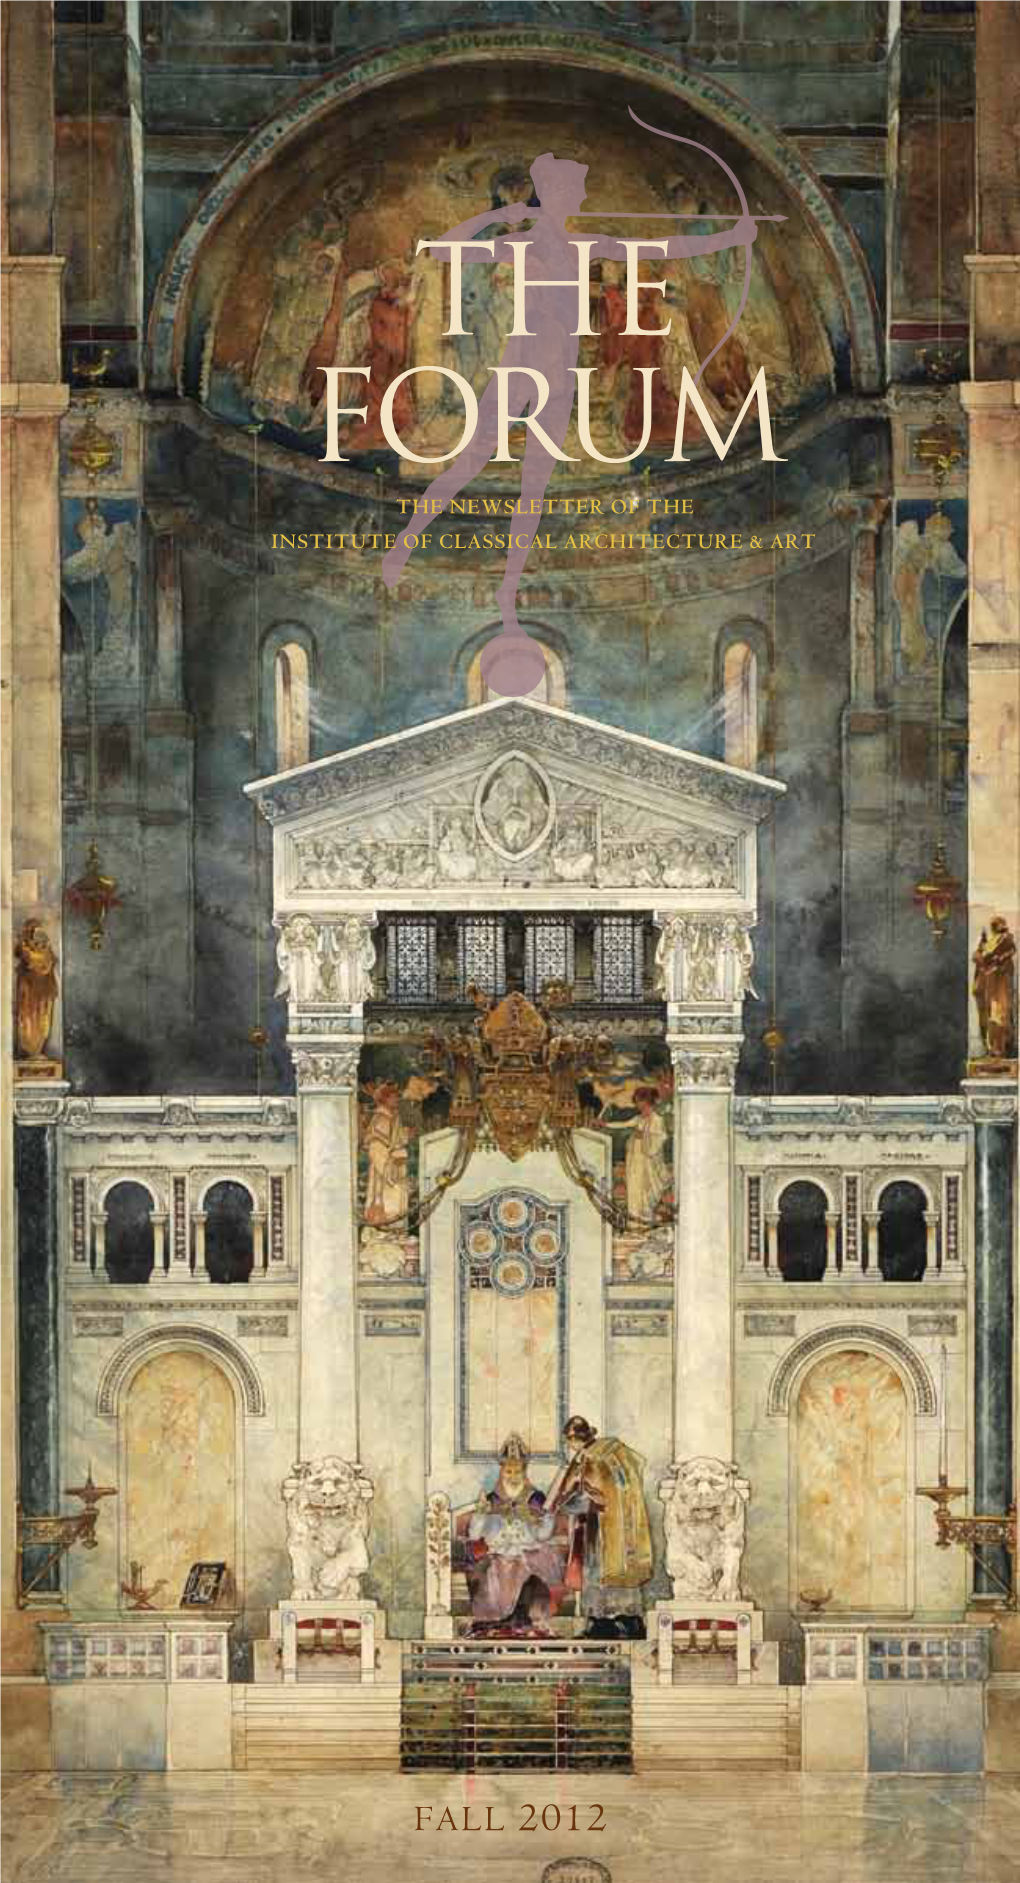 The Forum the NEWSLETTER of the INSTITUTE of CLASSICAL ARCHITECTURE & ART